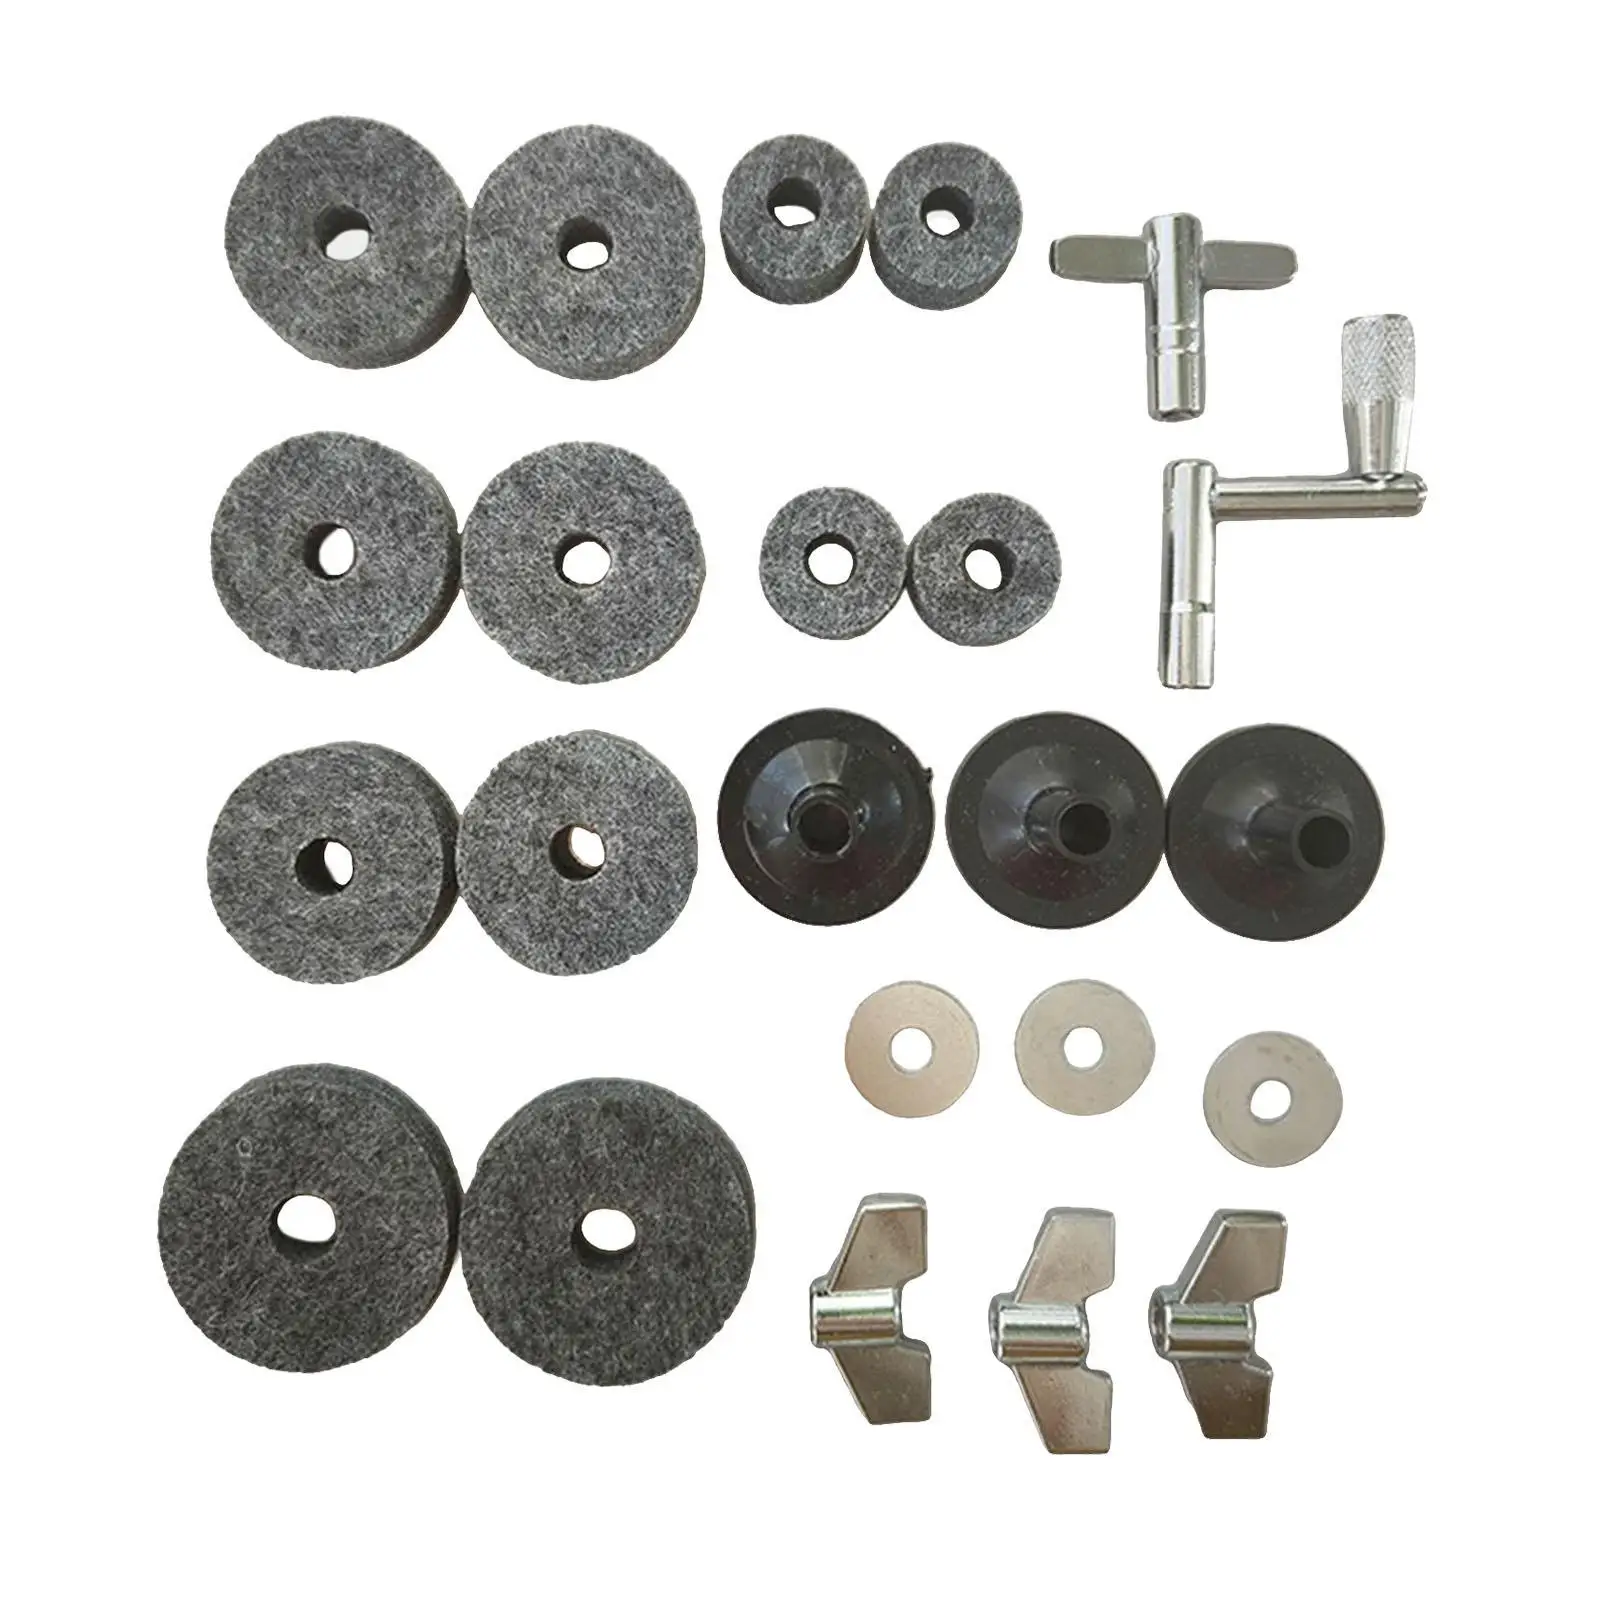 Cymbal Replacement Accessories, Drum Cymbal Felt Pads Durable Drum Keys for Drum Set, Cymbal Felts Kits Cymbal Stand Felts